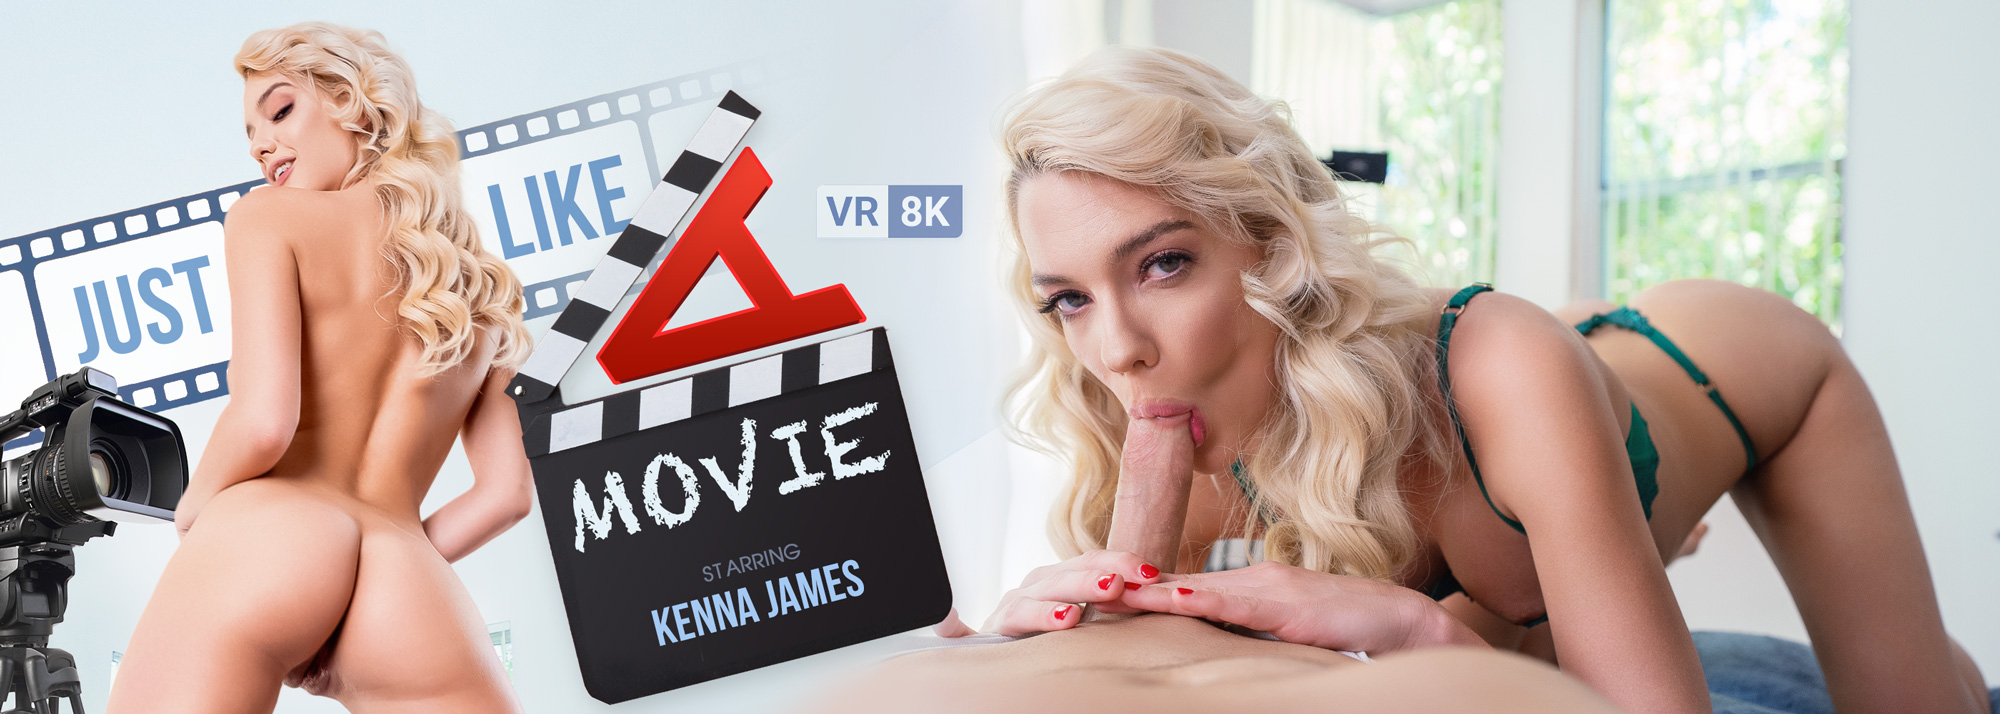 Just Like A Movie - VR Porn Video, Starring Kenna James VR.